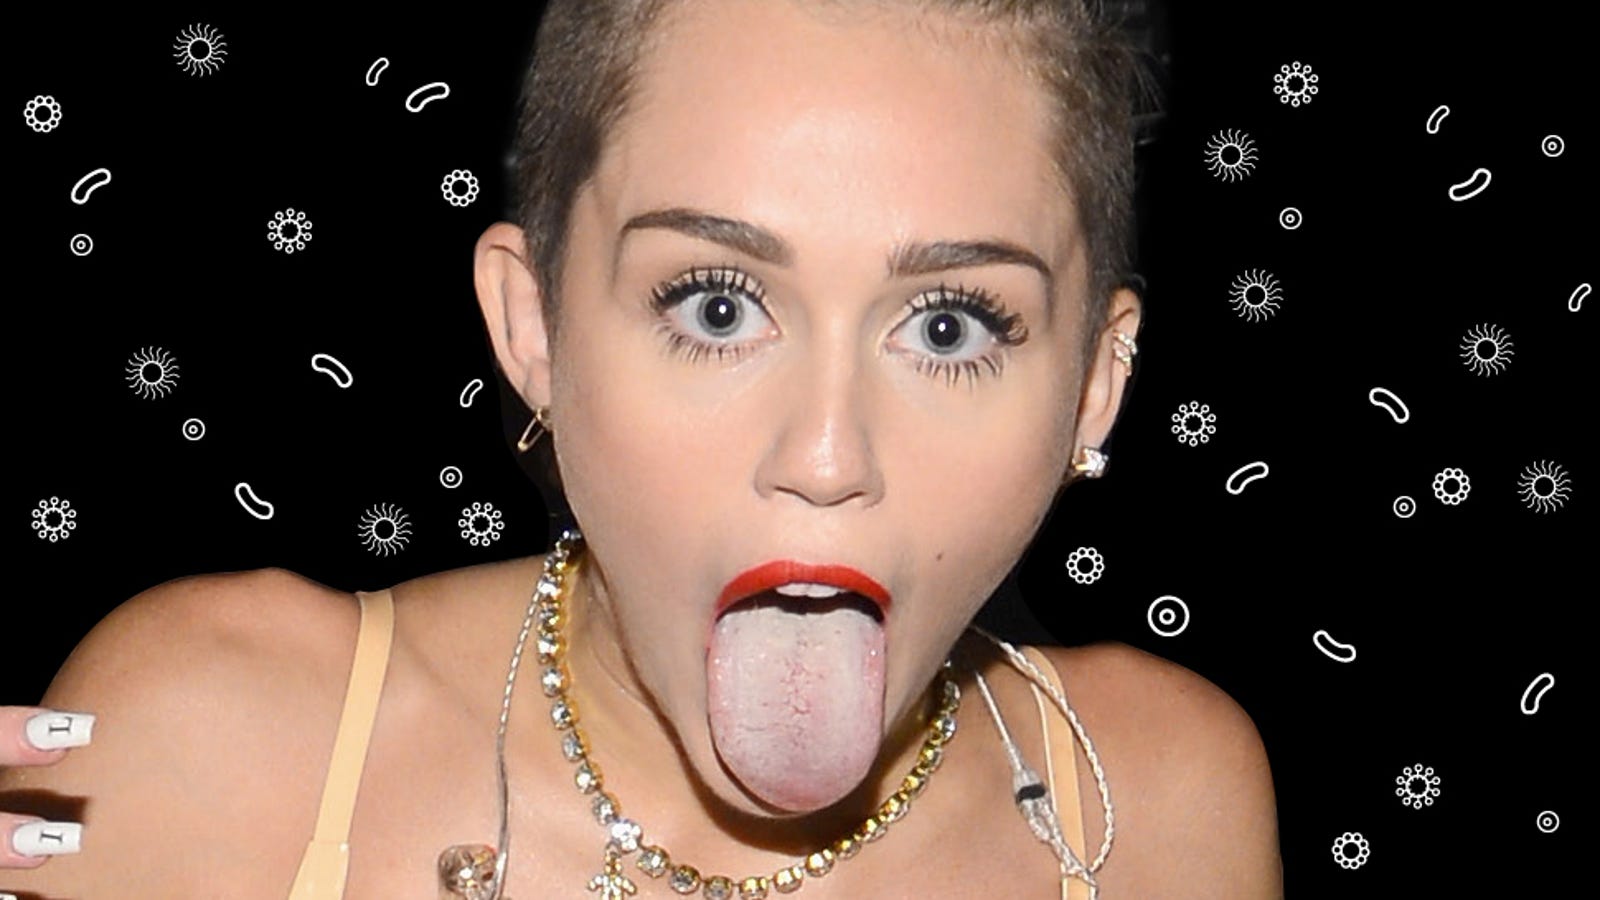 An Encyclopedia of Diseases Miley Cyrus Can Catch by Licking Things - Trave...